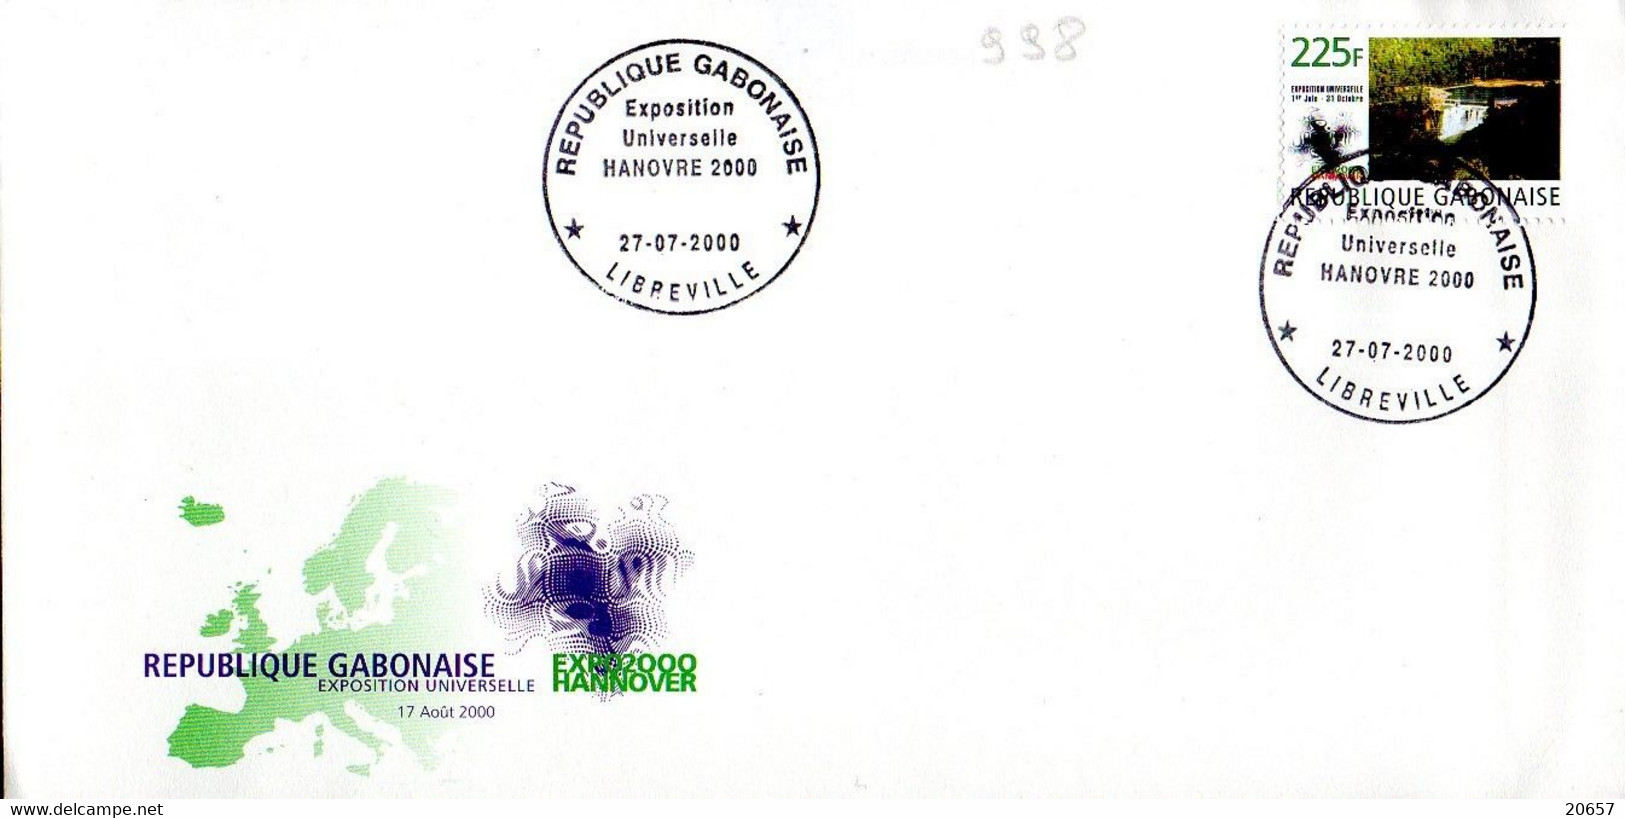 GABON 0998 Fdc Exposition Universelle Hanovre Germany 2000, Deutchland Hannover - 2000 – Hanover (Germany)